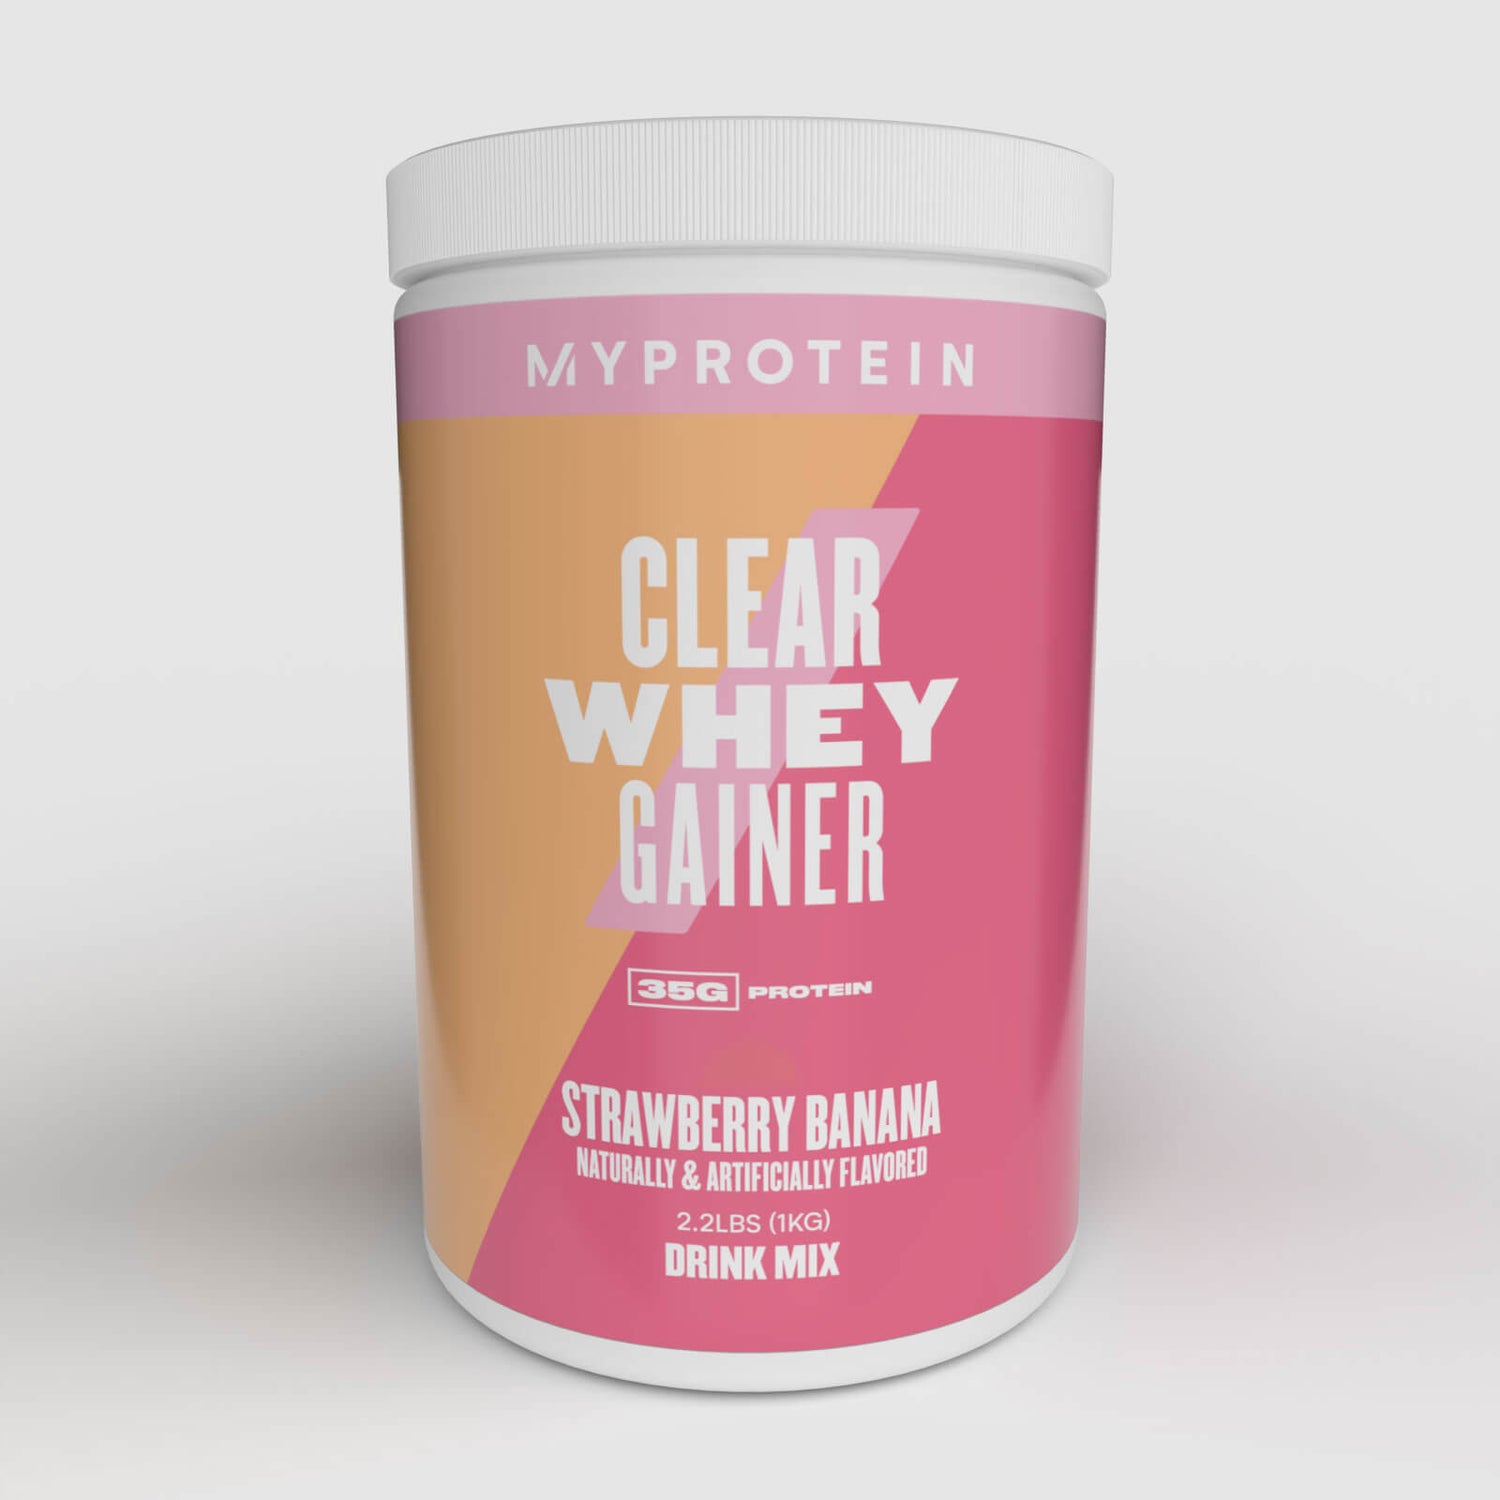 Myprotein Clear Whey Isolate Gainer (USA) - 8servings - Strawberry Banana